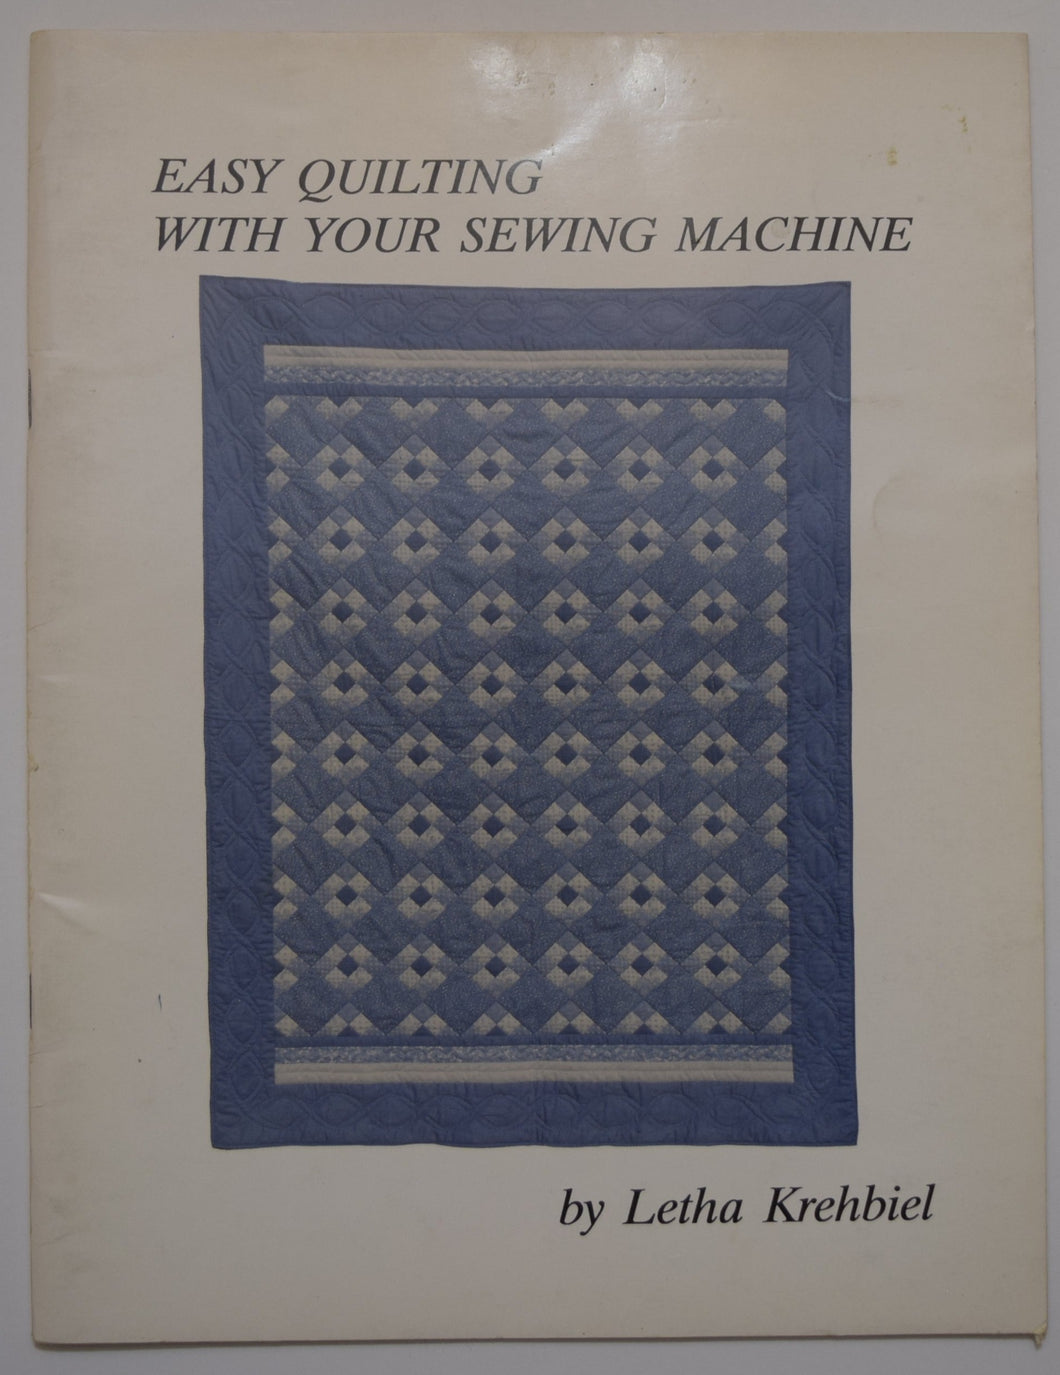 Easy Quilting With Your Sewing Machine by Letha Krehbiel